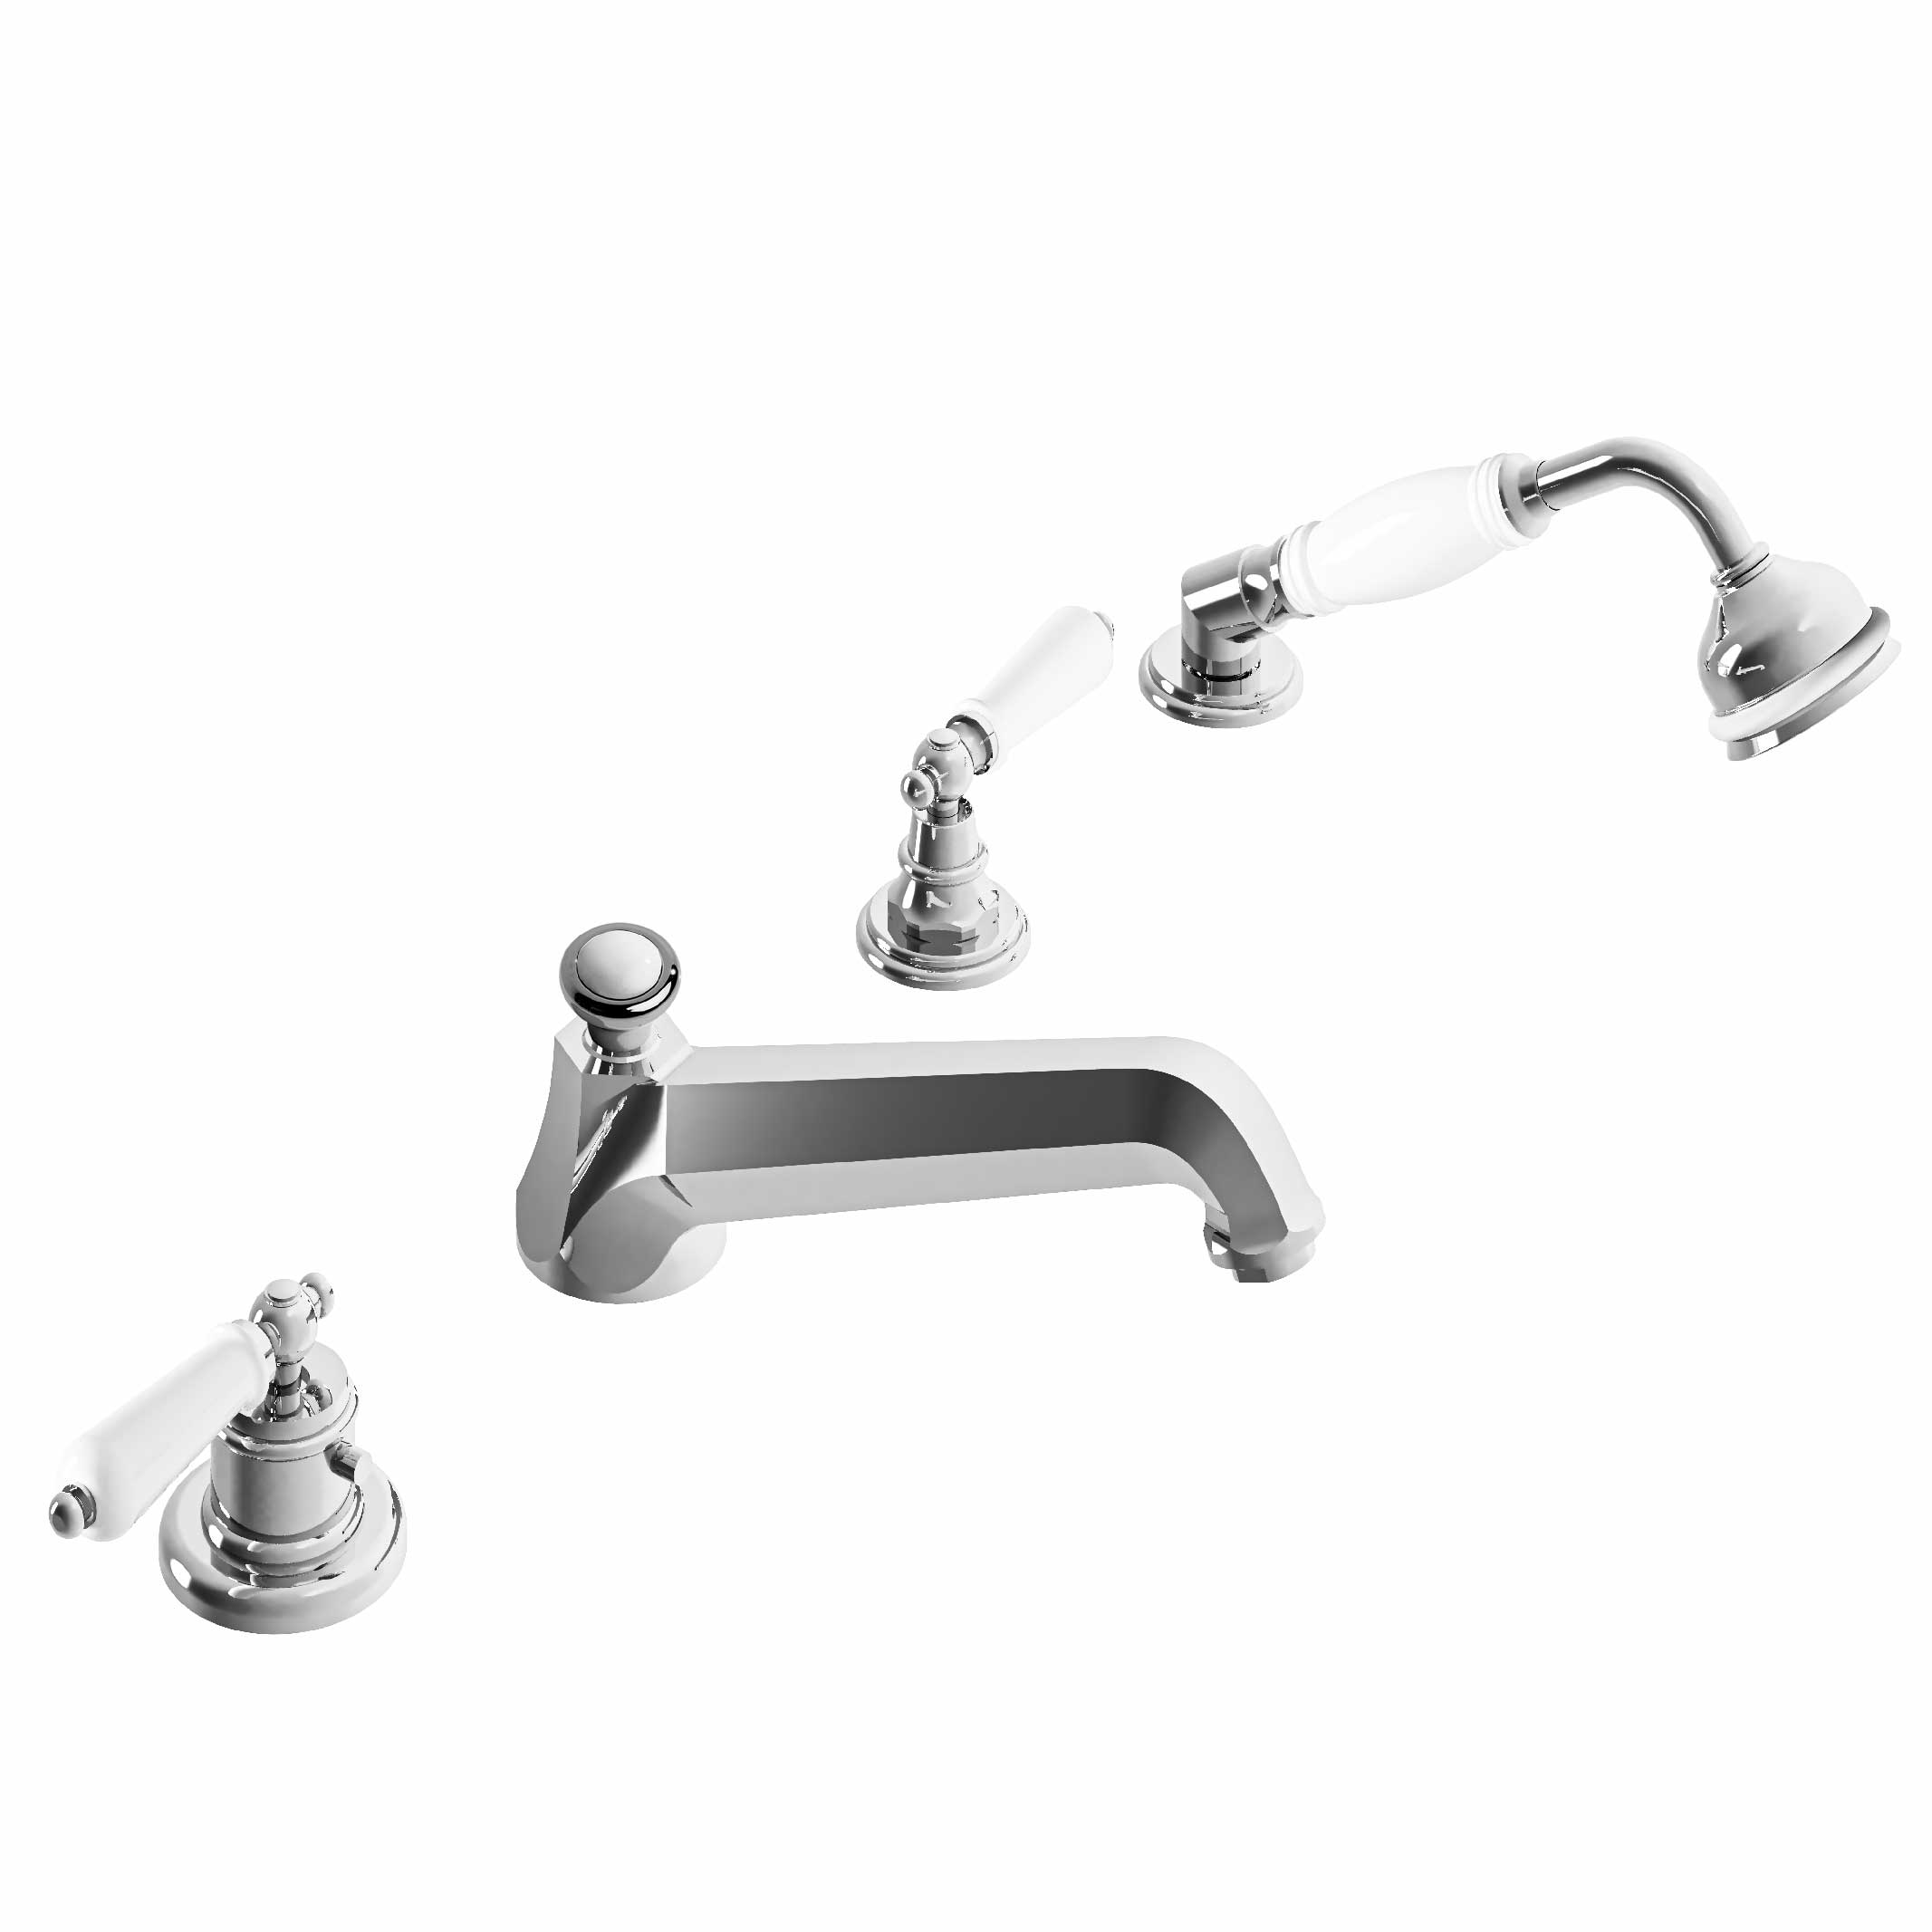 M32-3304T 4-hole bath and shower thermo. mixer